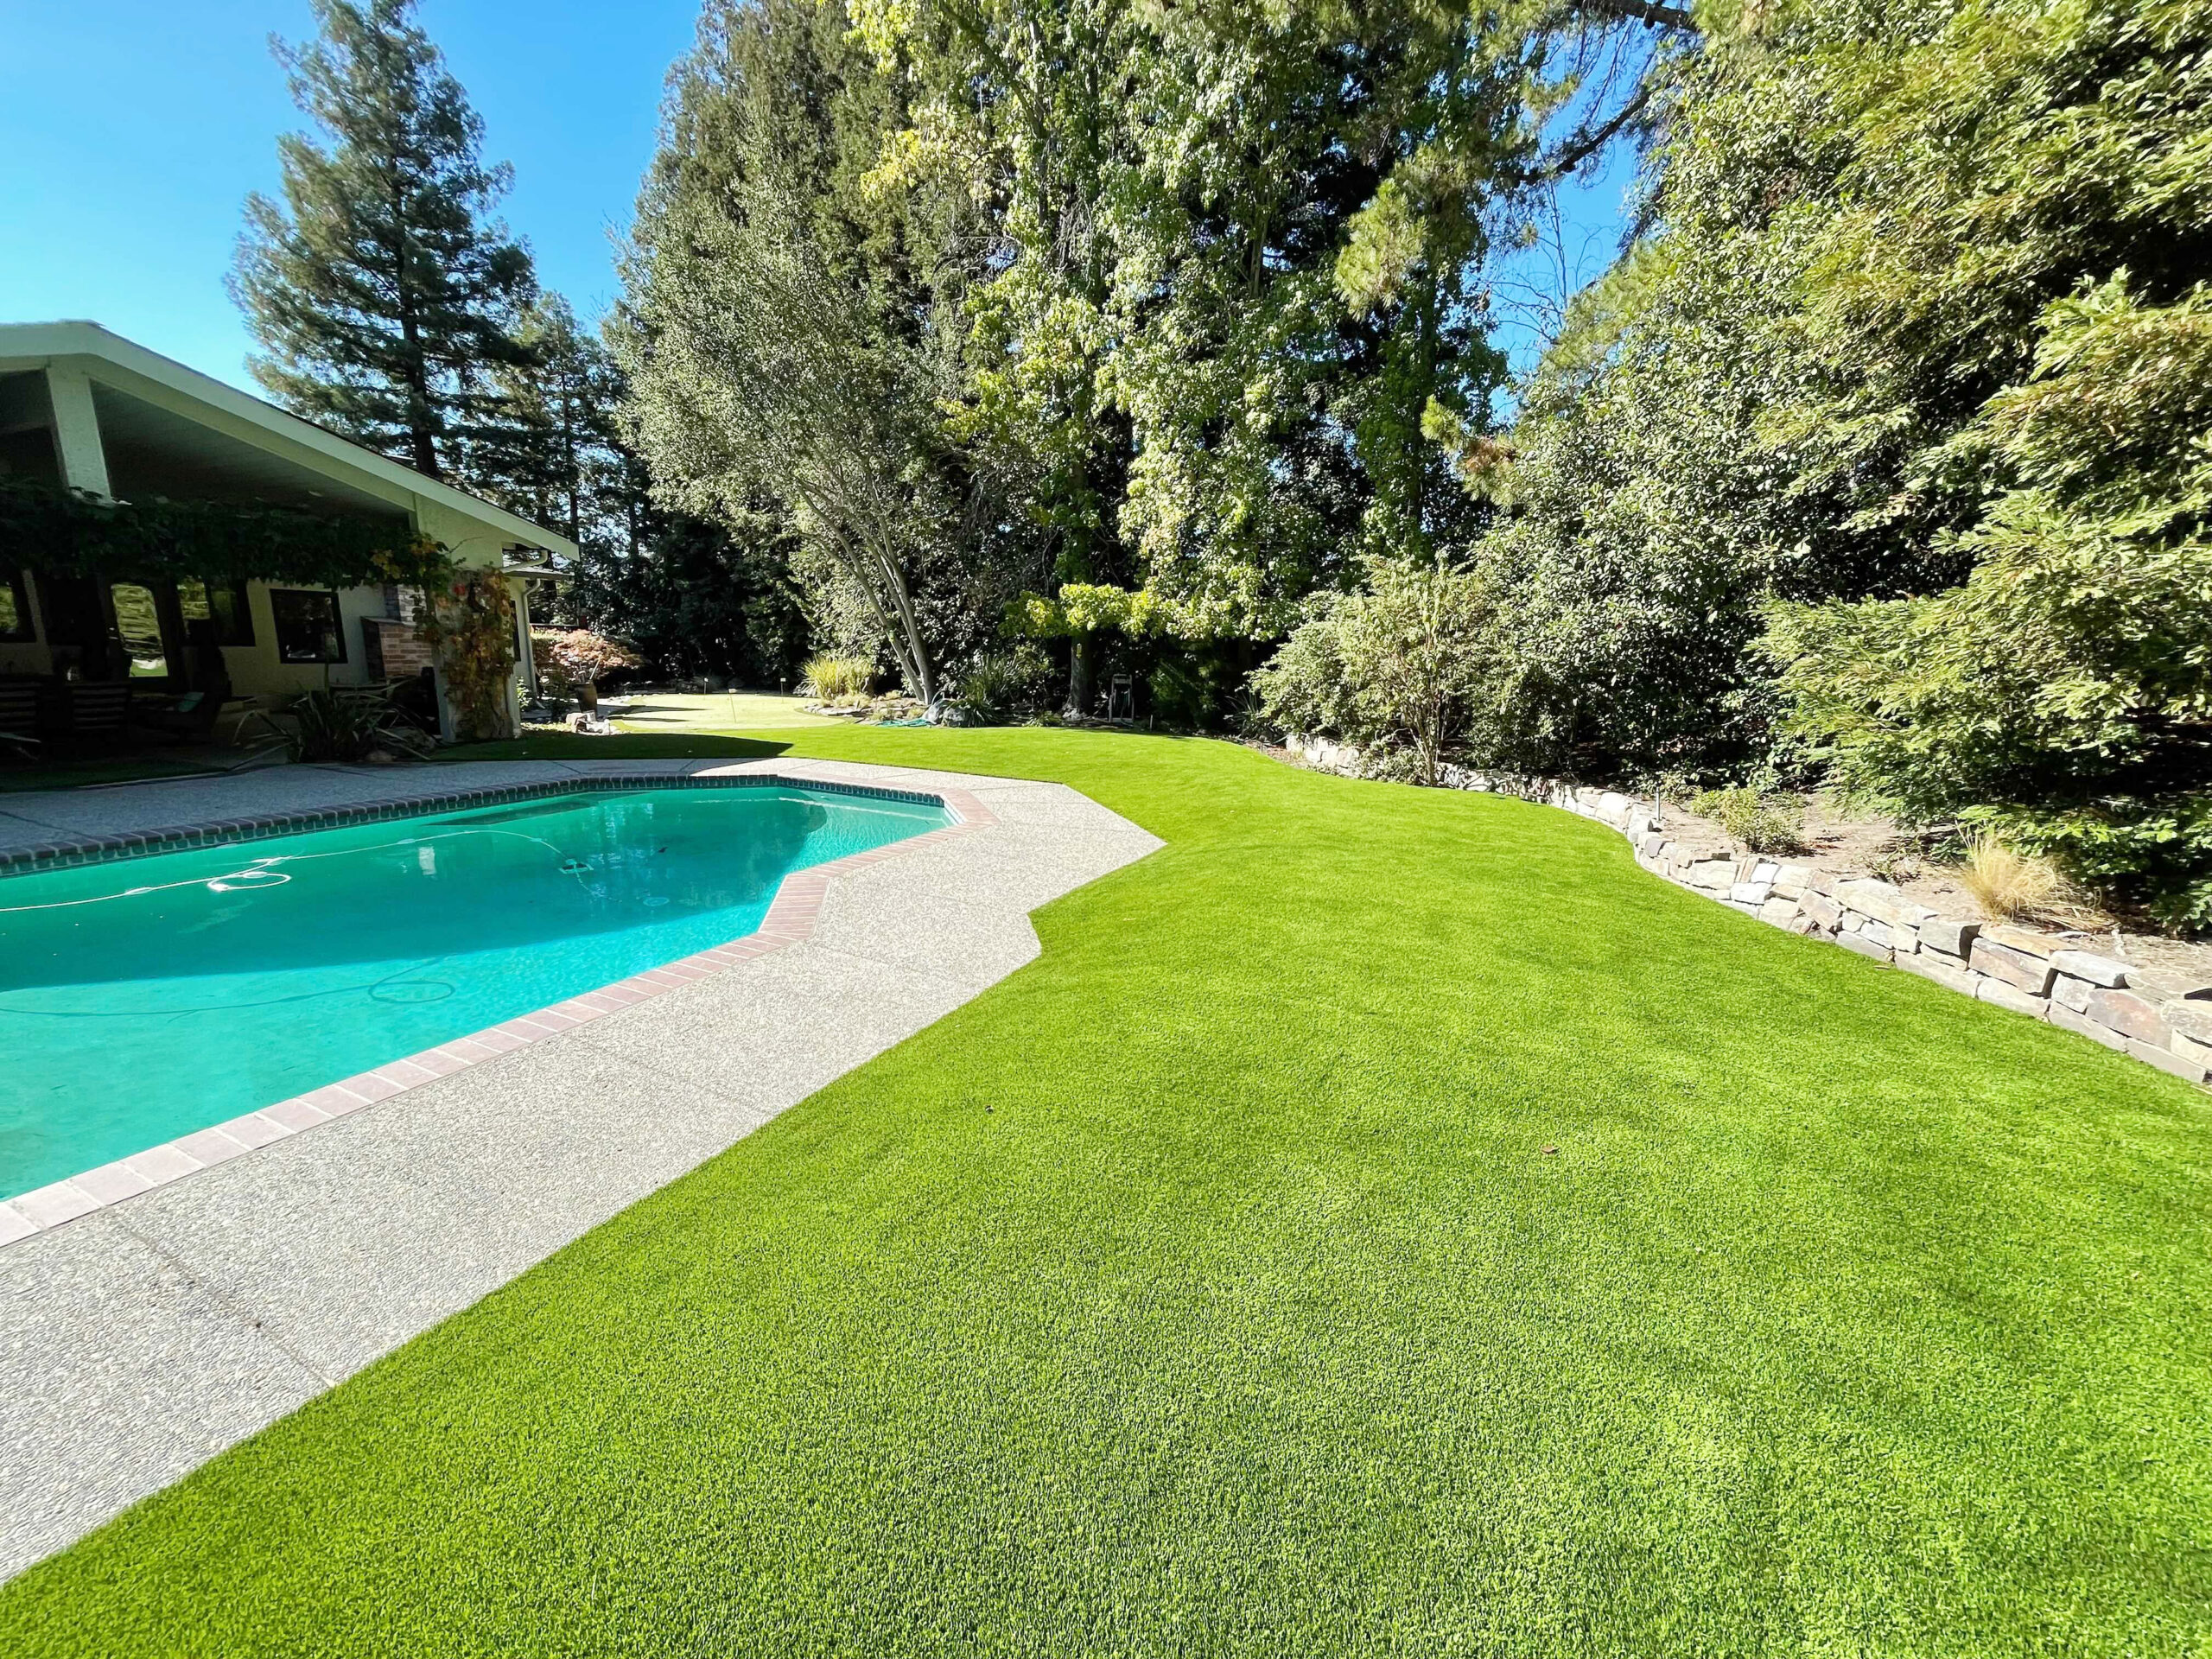 How to Create a Low-Maintenance Pool Area with Artificial Turf